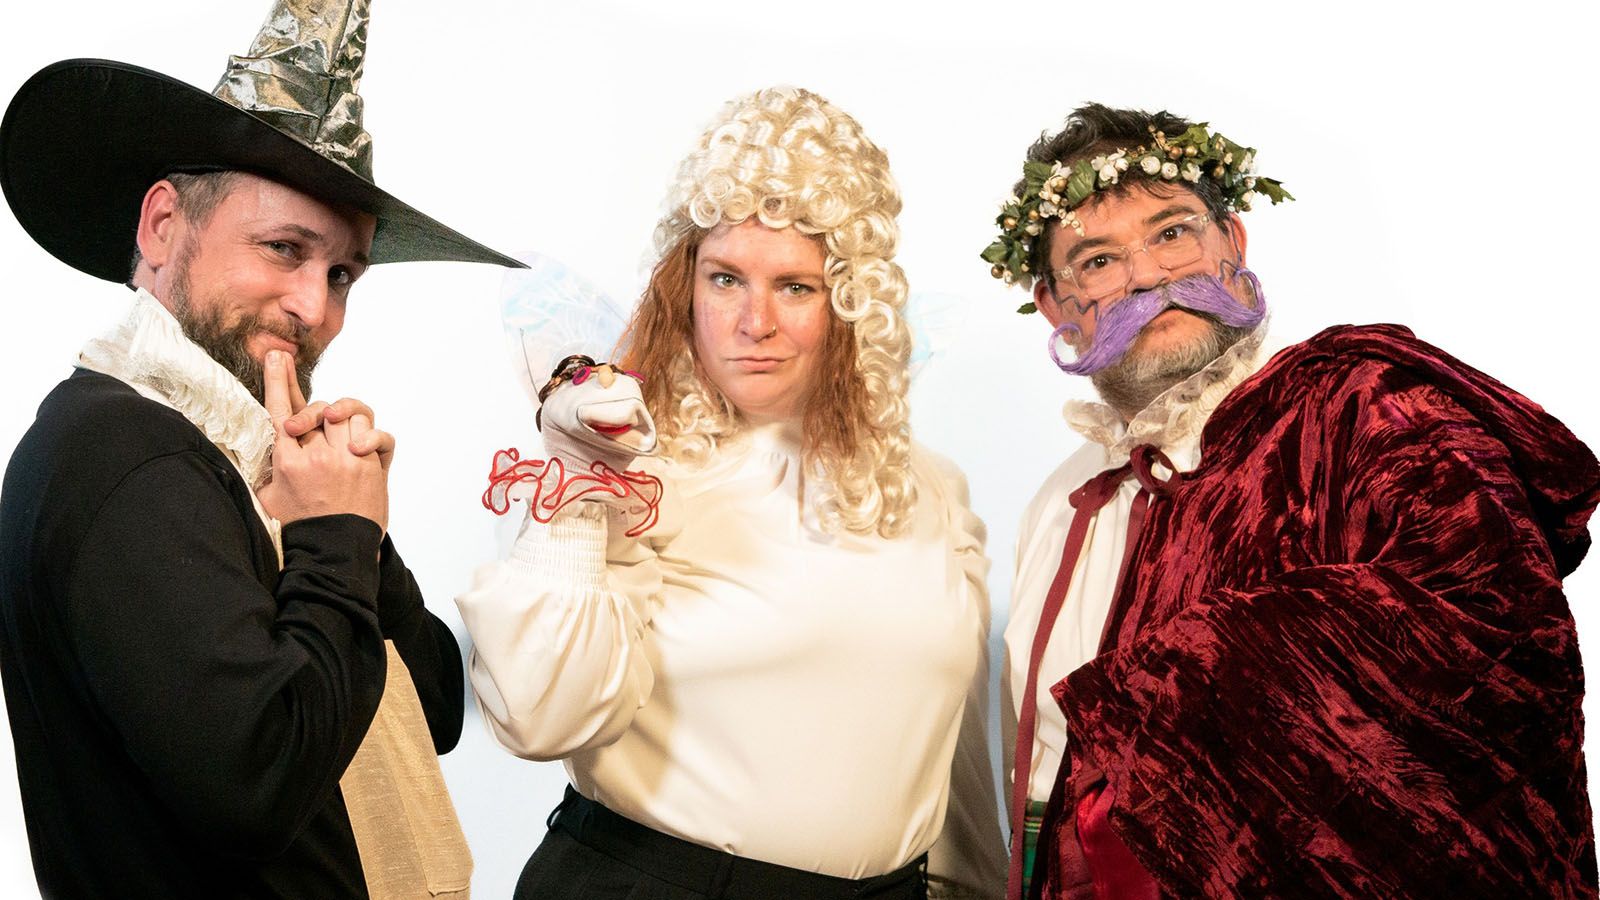 "The Complete Works of William Shakespeare (Abridged)" opens March 17 at PPG ArtsLab.